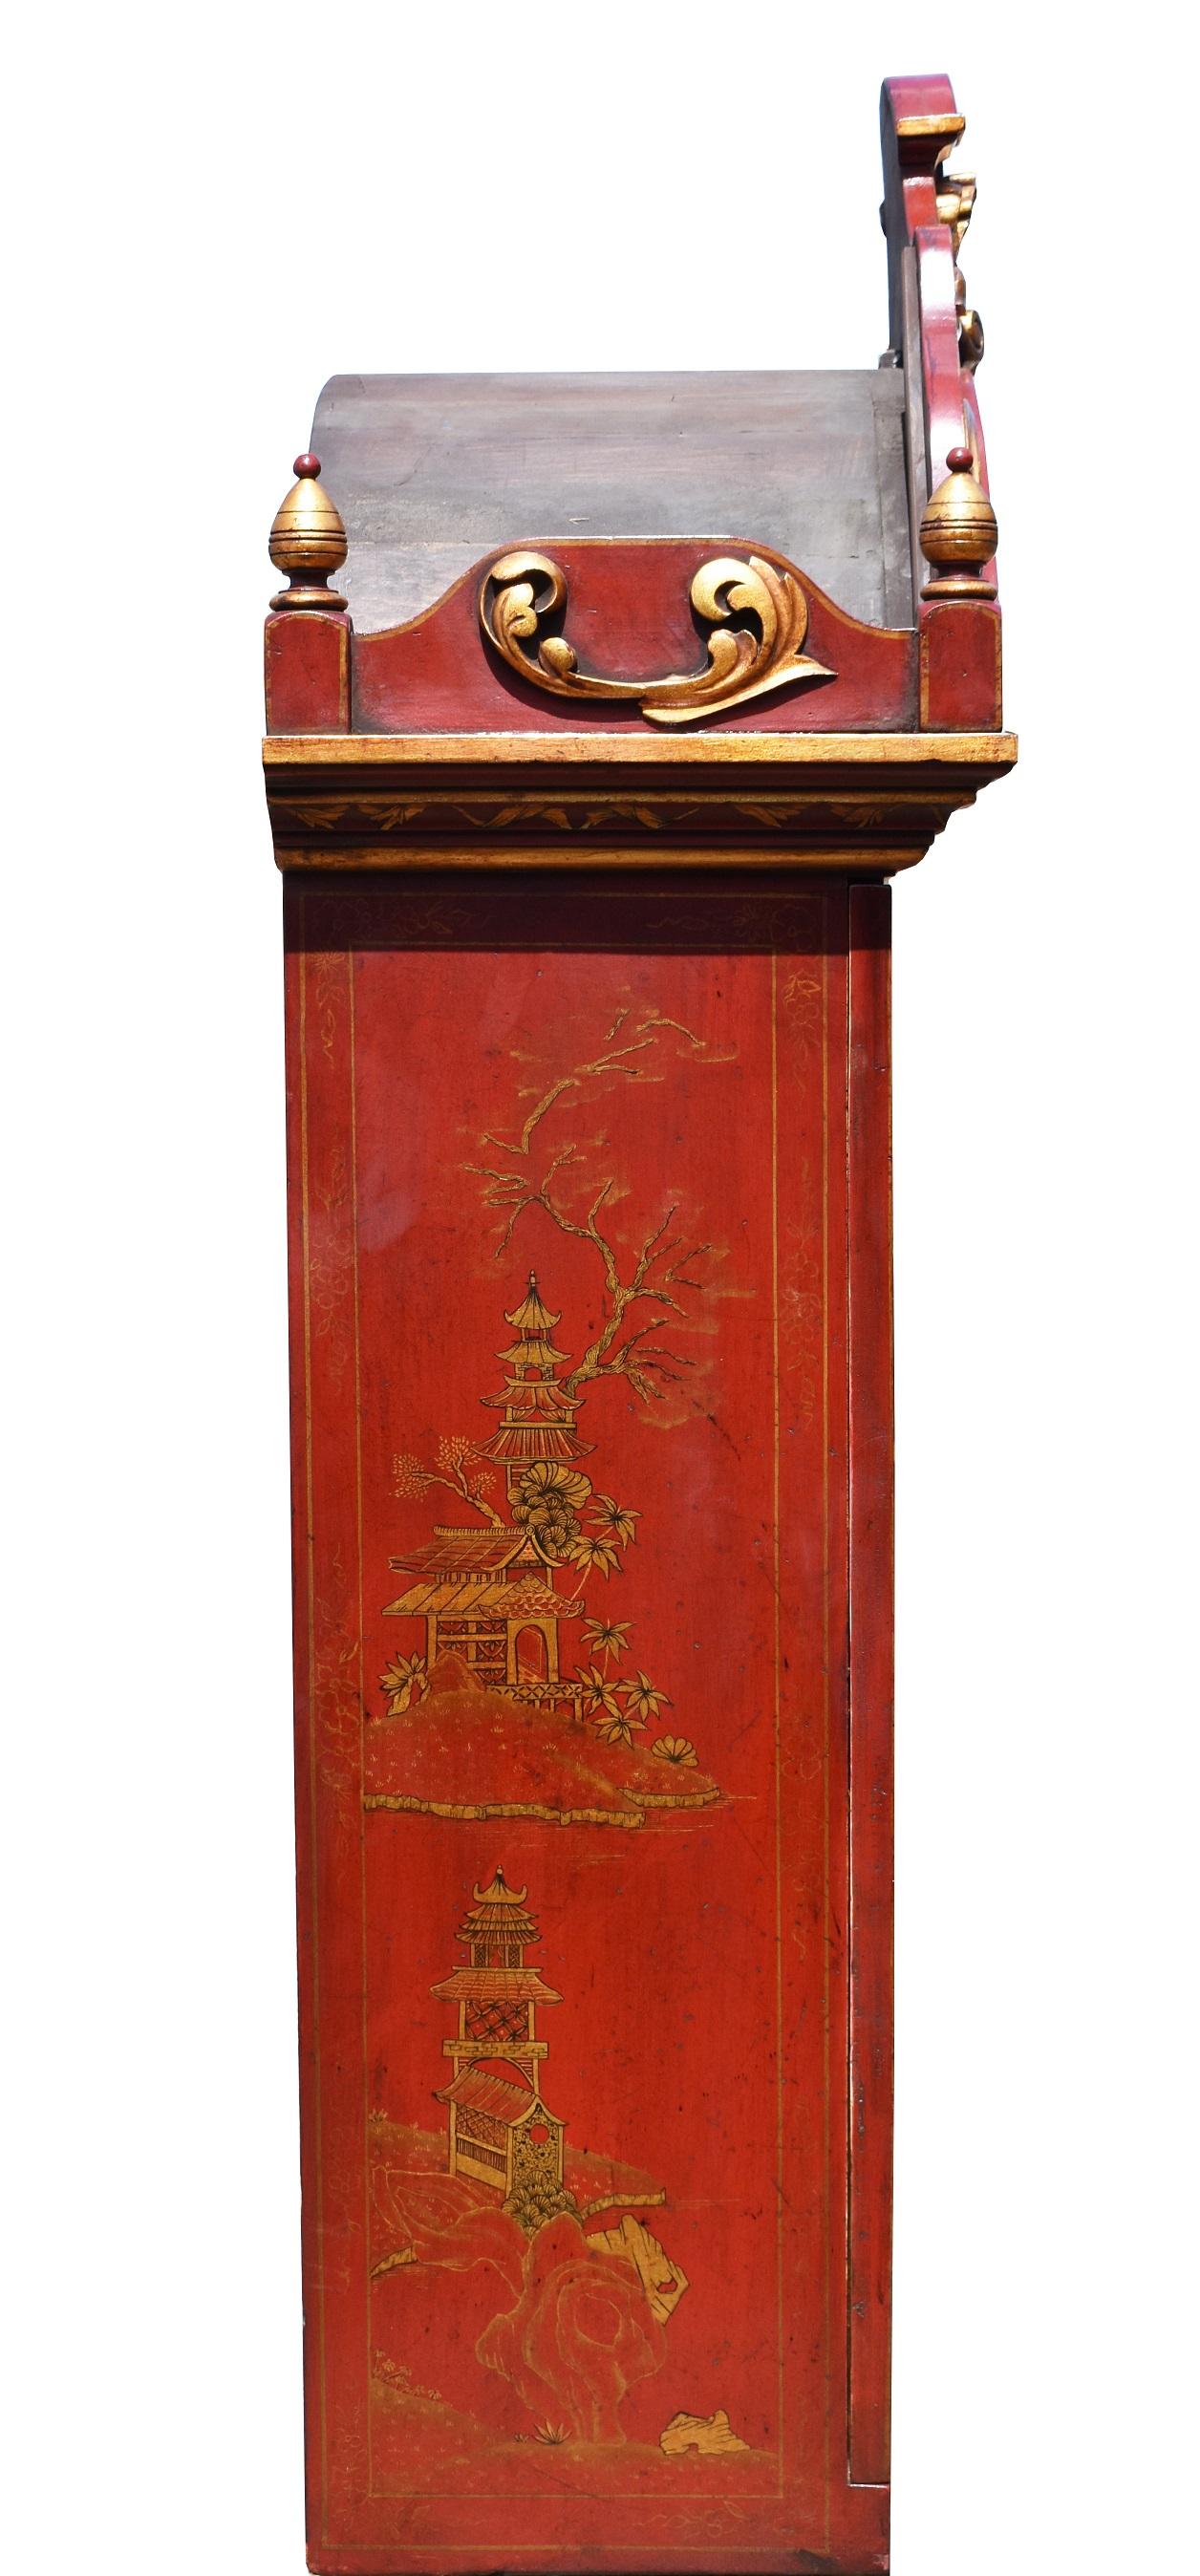 18th Century Lacquer and Gilt Chinoiserie Bureau Bookcase In Good Condition For Sale In Chelmsford, Essex